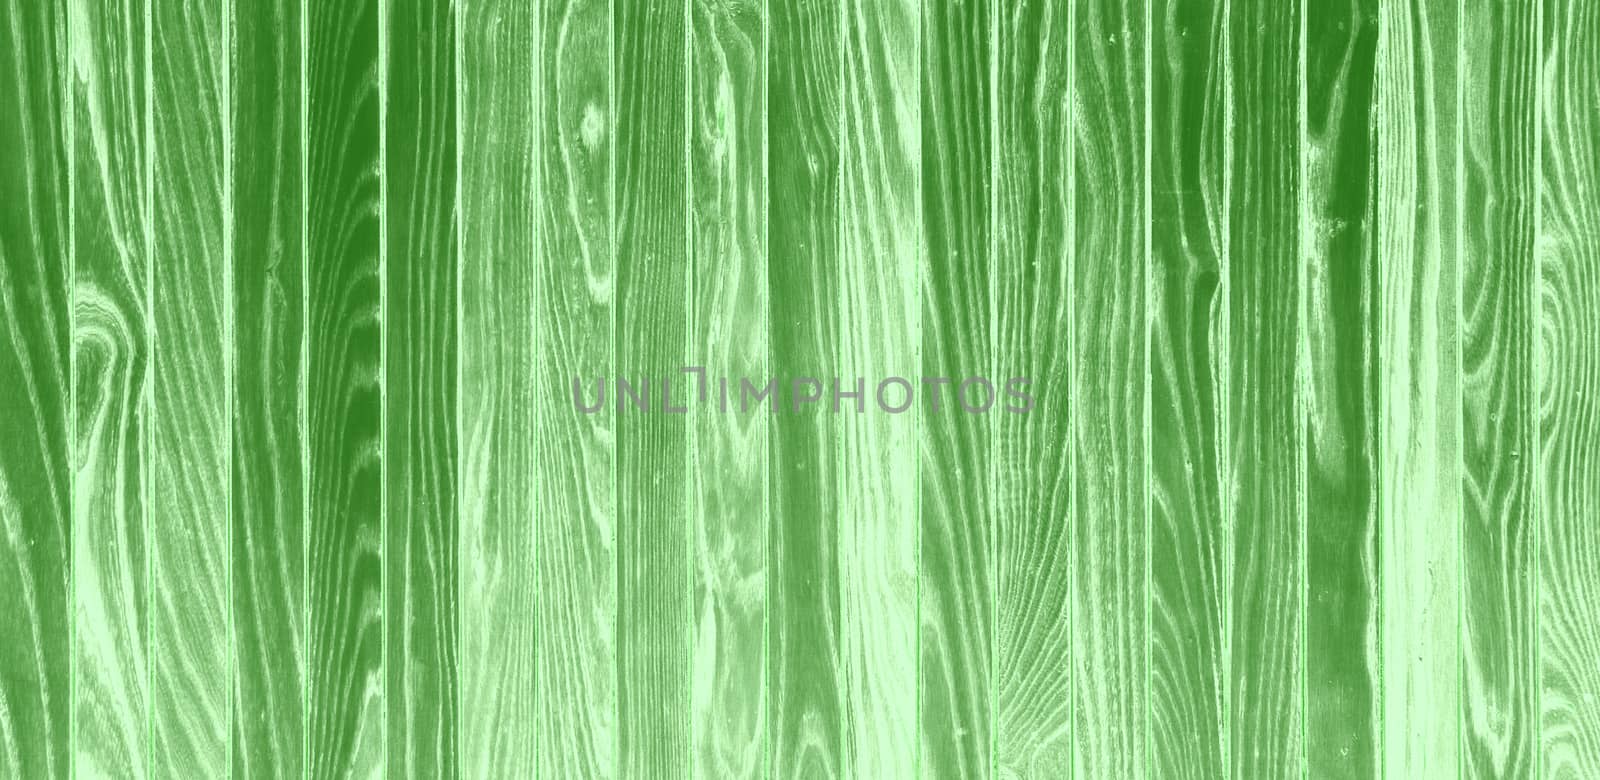 Green wood textrue background by ideation90